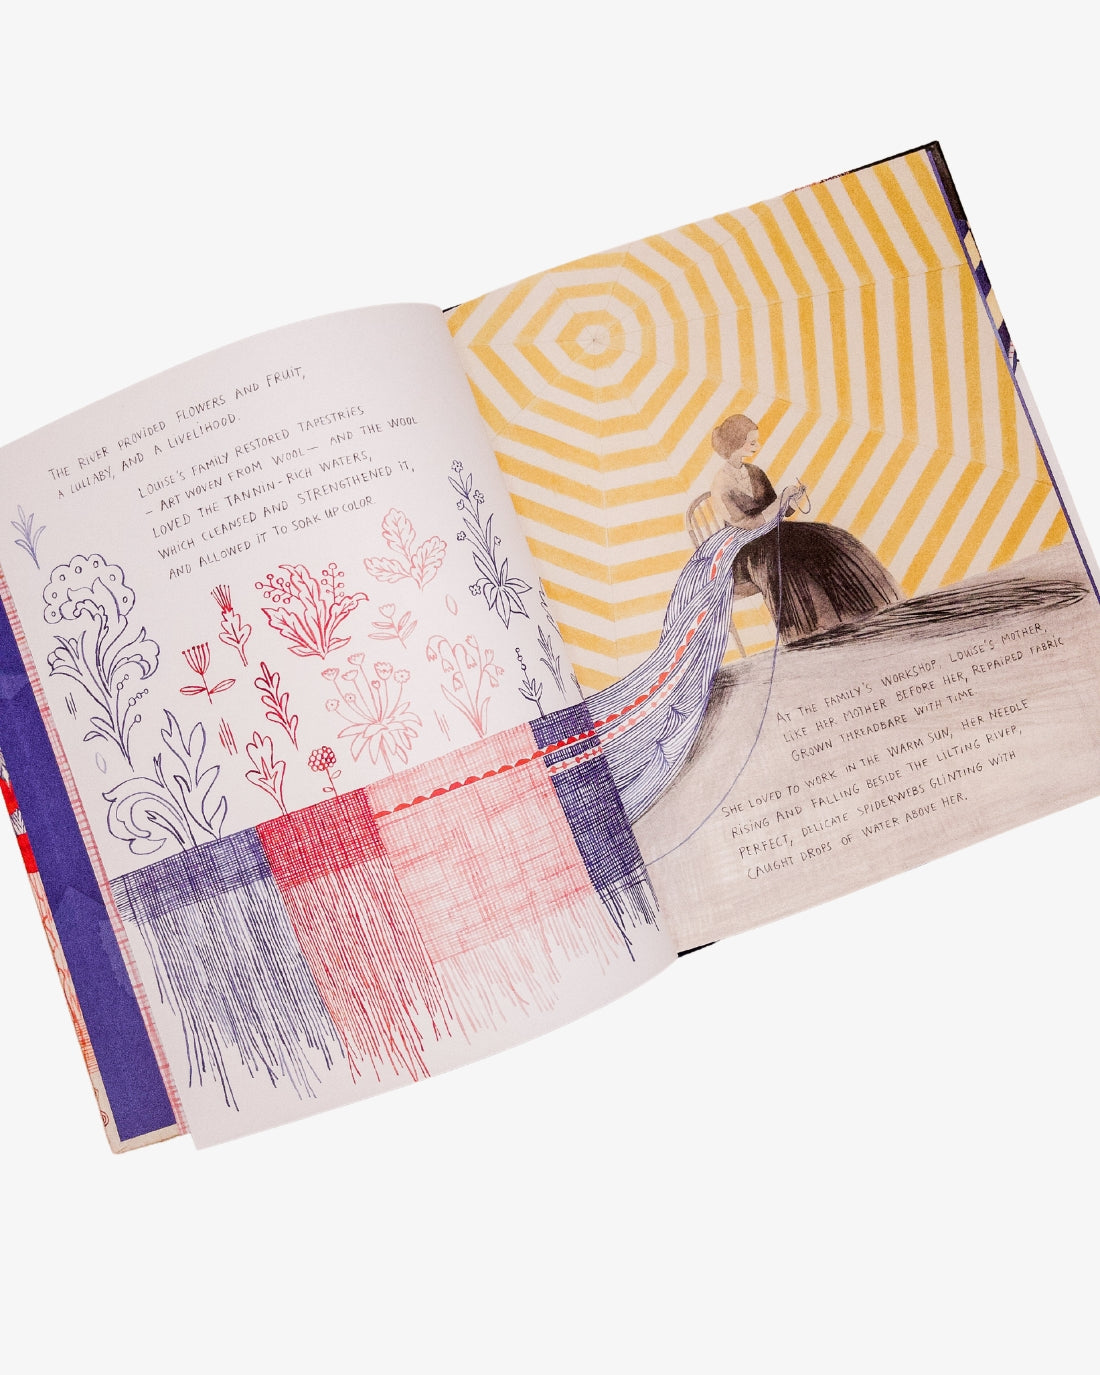 Cloth Lullaby: The Woven Life of Louise Bourgeois by Amy Novesky and I -  Tatter